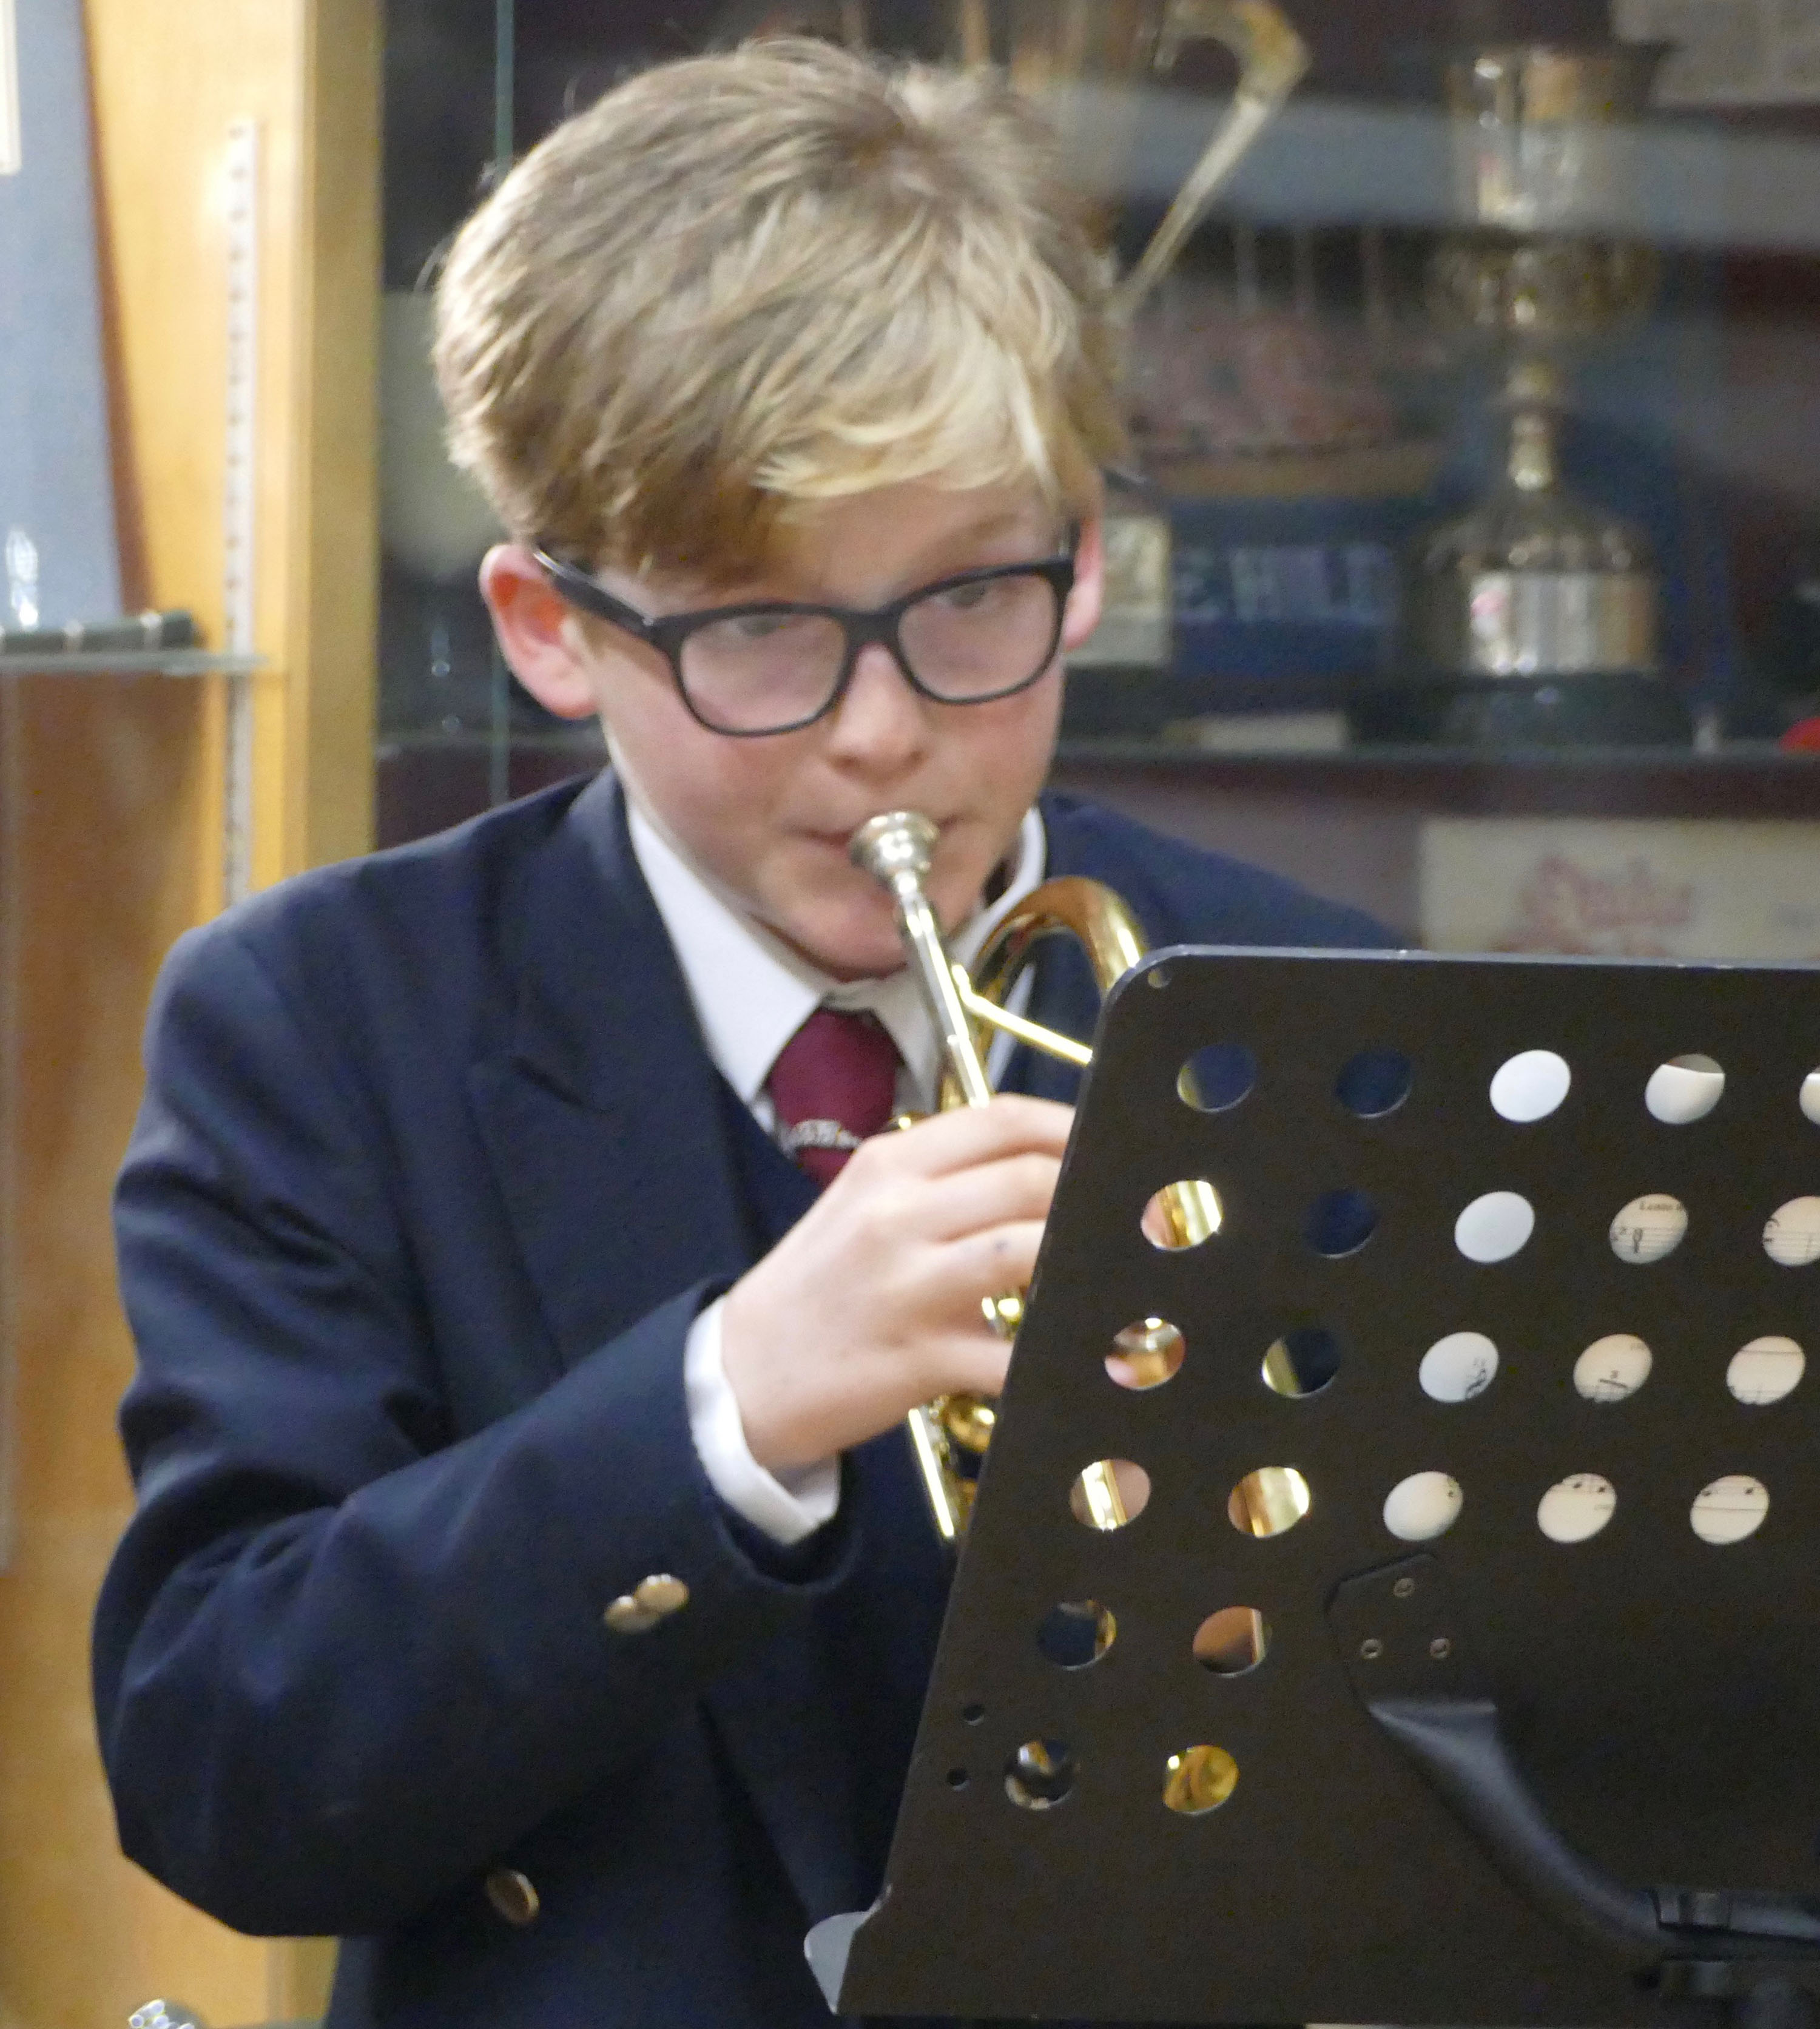 Years 6-8 Informal Concert, 23rd March 2017